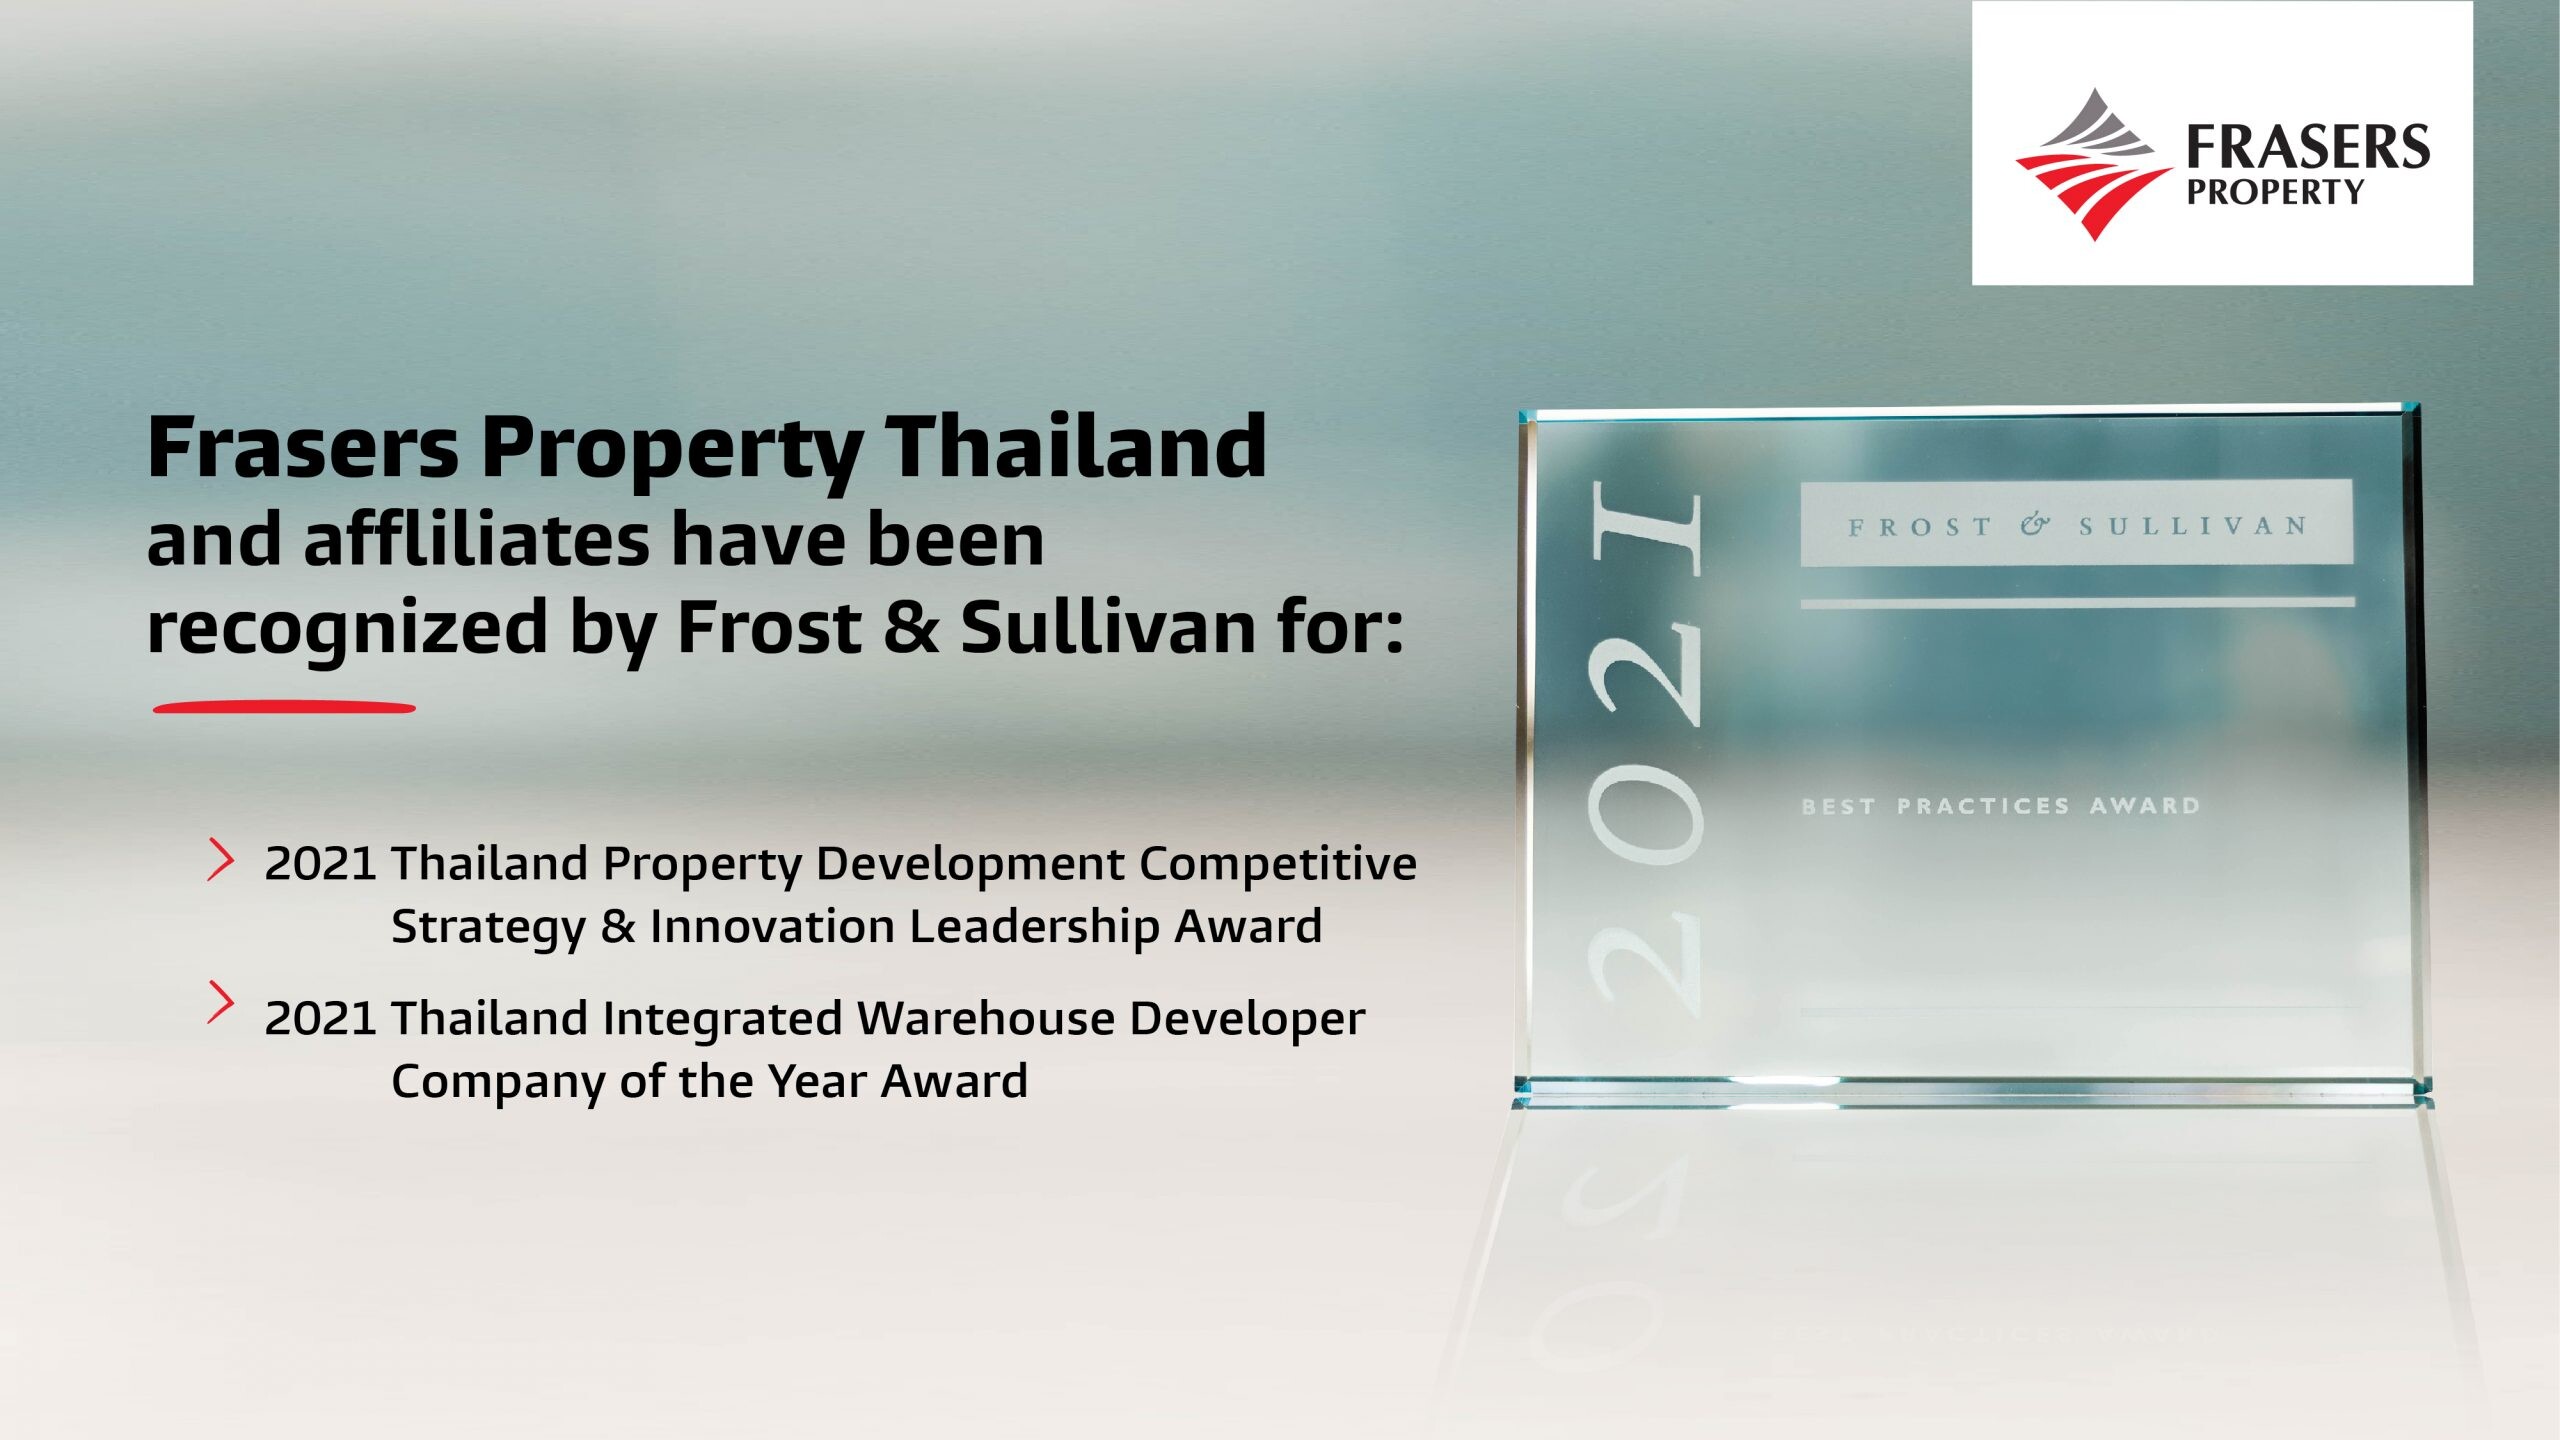 Frasers Property Thailand recognized as the most prominent and innovative real estate platform in Thailand by Frost & Sullivan